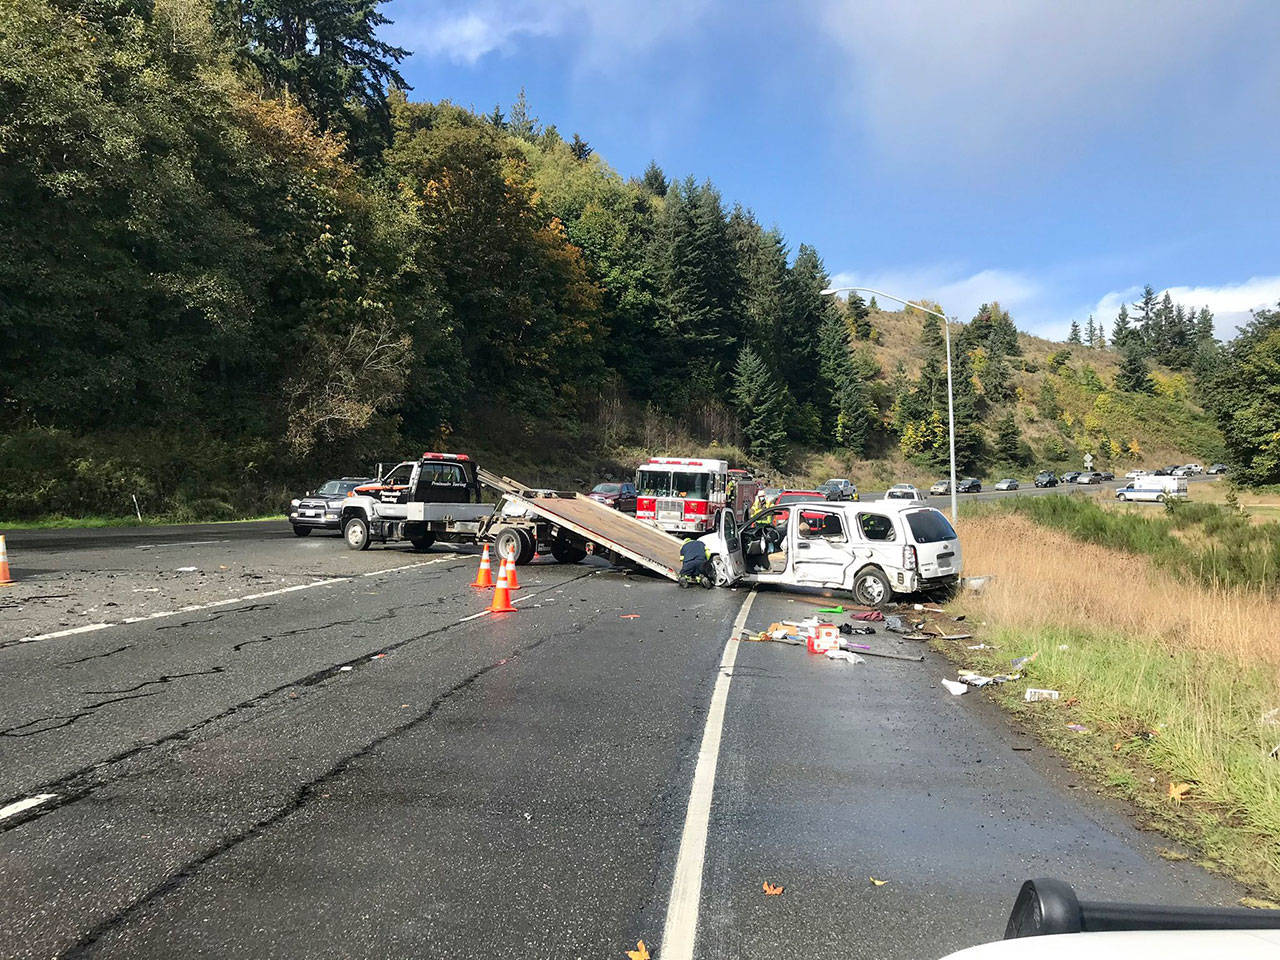 Washington State Patrol troopers clear the scene of a two-car injury collision on U.S. Highway 101 at Morse Creek in Port Angeles on Tuesday, Oct. 13, 2020. (Photo courtesy of Washington State Patrol)